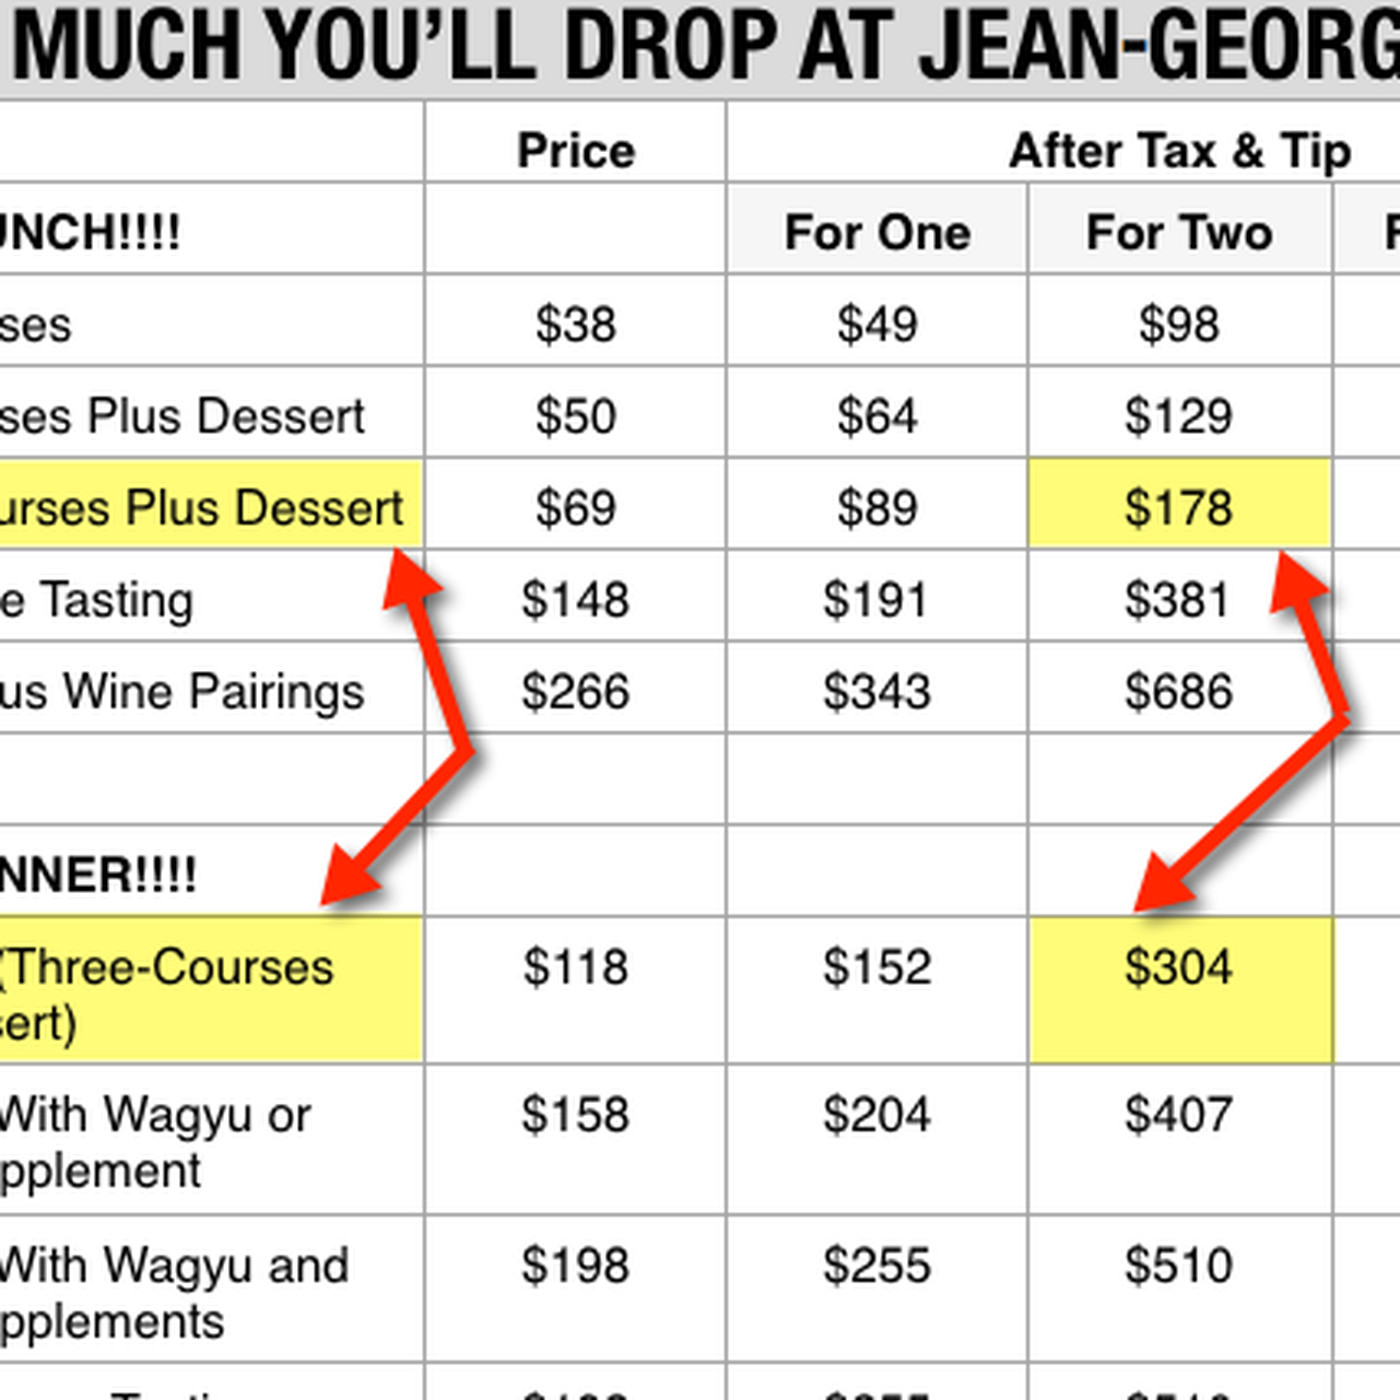 wallet penance magic Is Jean-Georges Our Cheapest Four Star Restaurant? - Eater NY